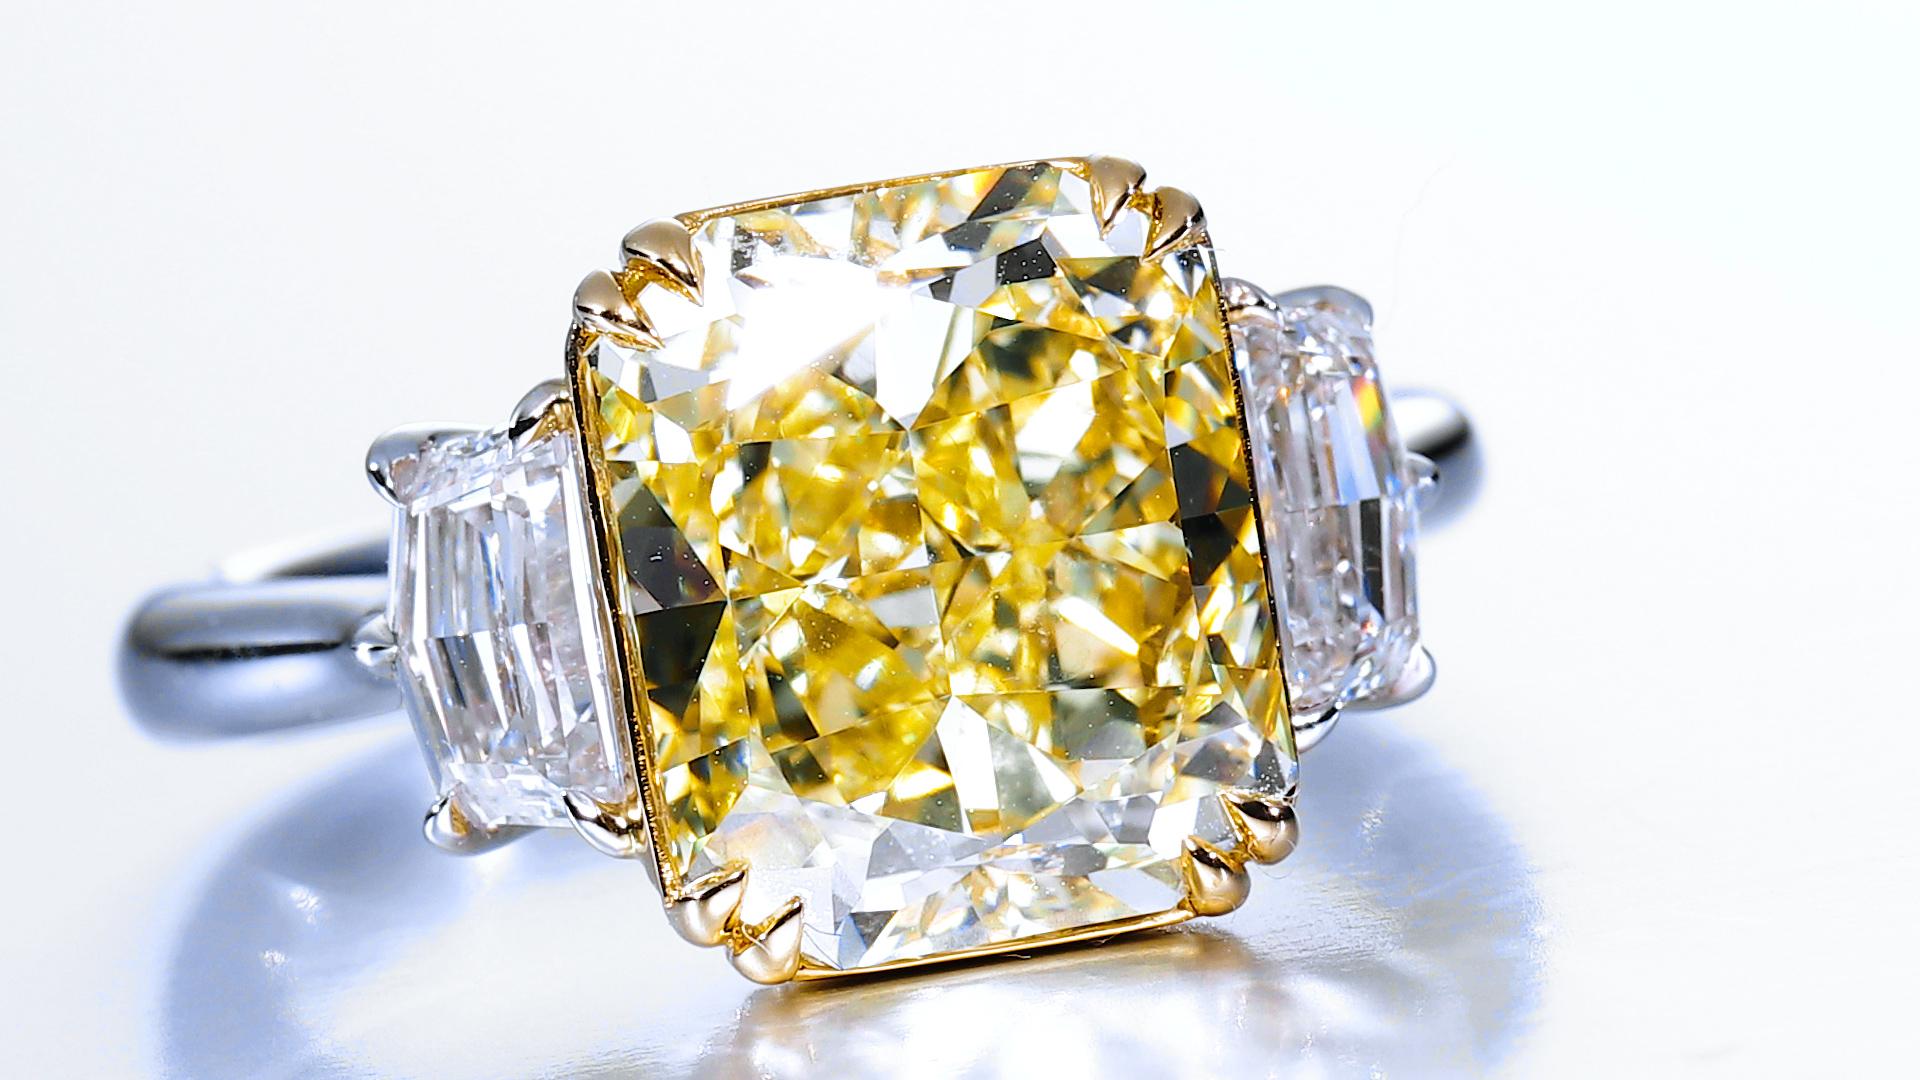 GIA Certified, 5.46ct Cushion cut Natural Fancy Yellow Diamond ring in 18KT Gold For Sale 2